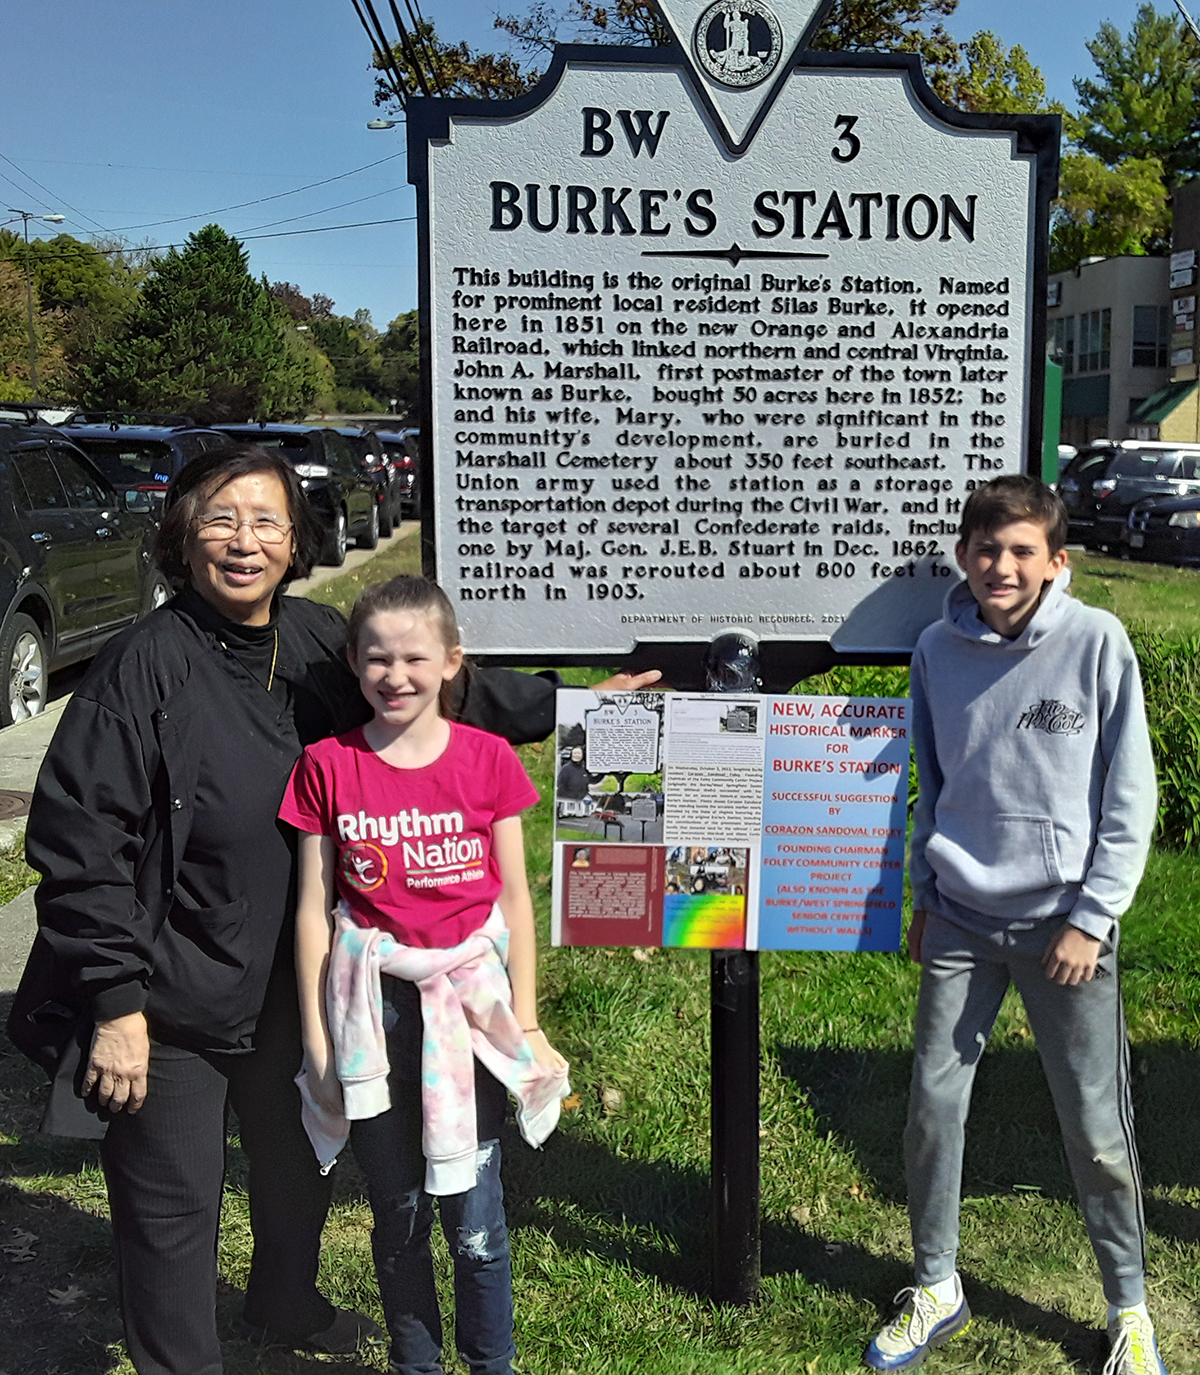 Corazon Sandoval Foley with grandchildren Ciara and Daniel in front of the Burke's Station historical marker.